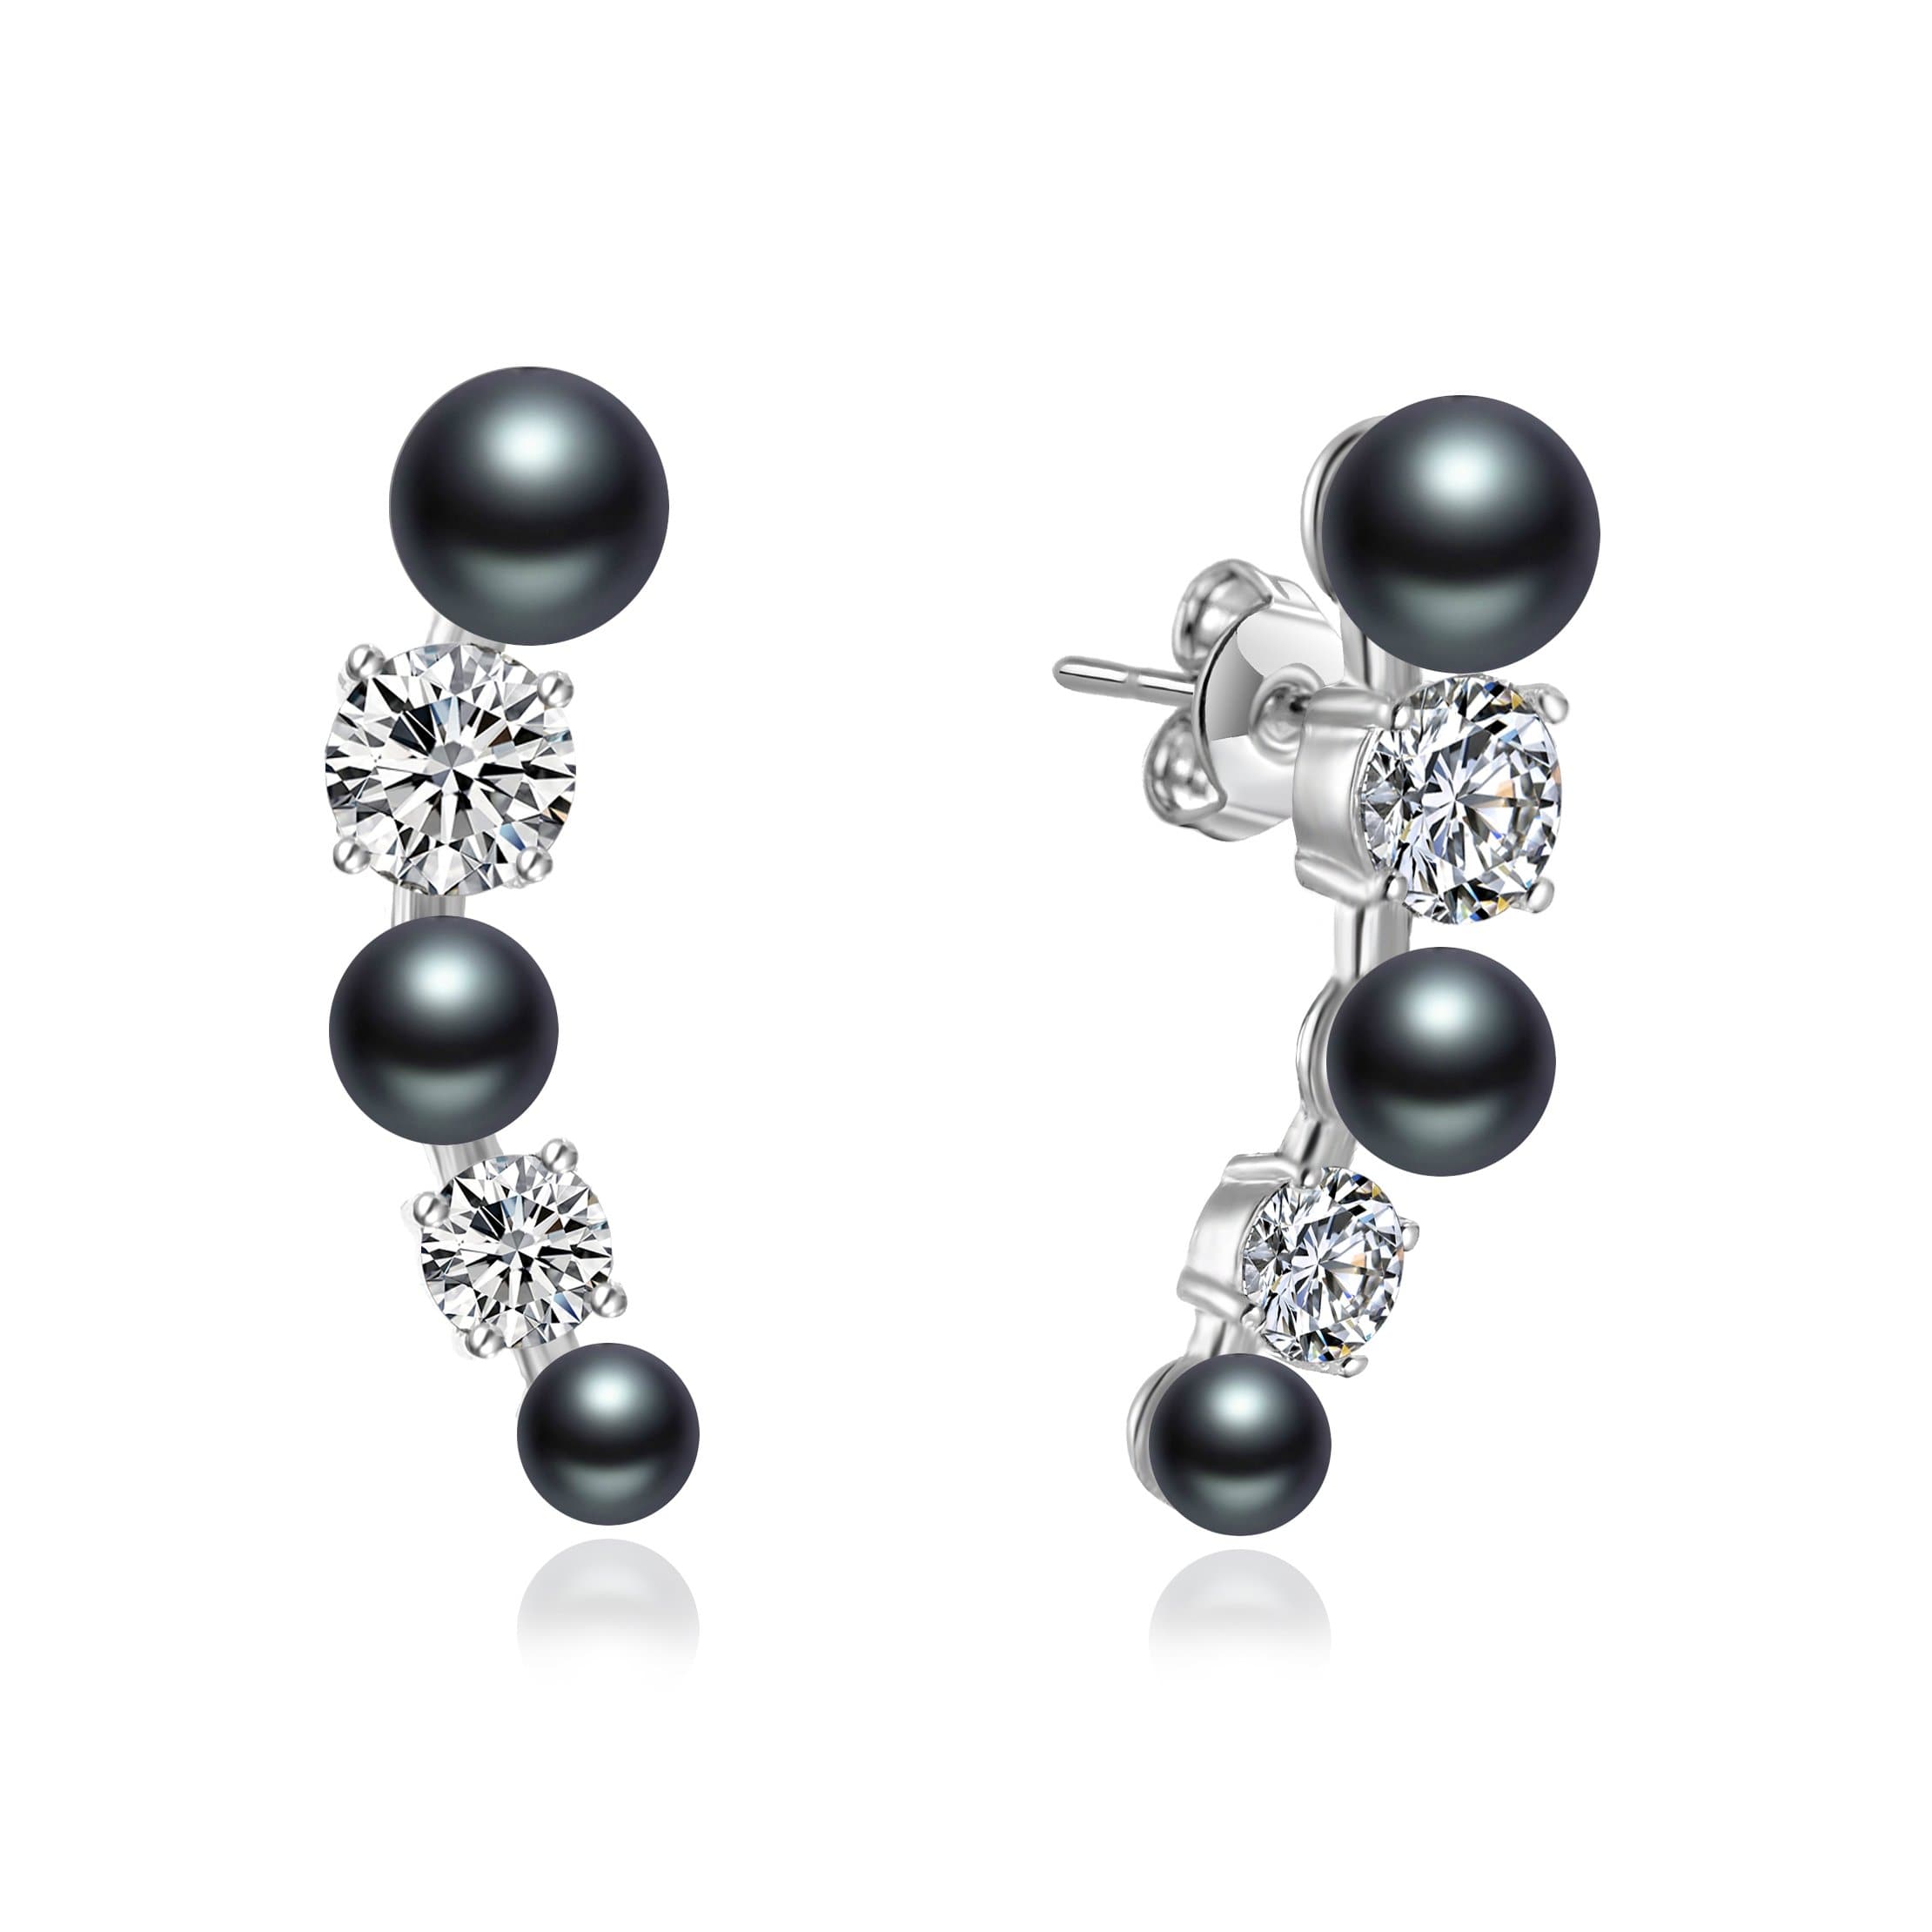 Black Pearl Climber Earrings Created with Zircondia® Crystals by Philip Jones Jewellery